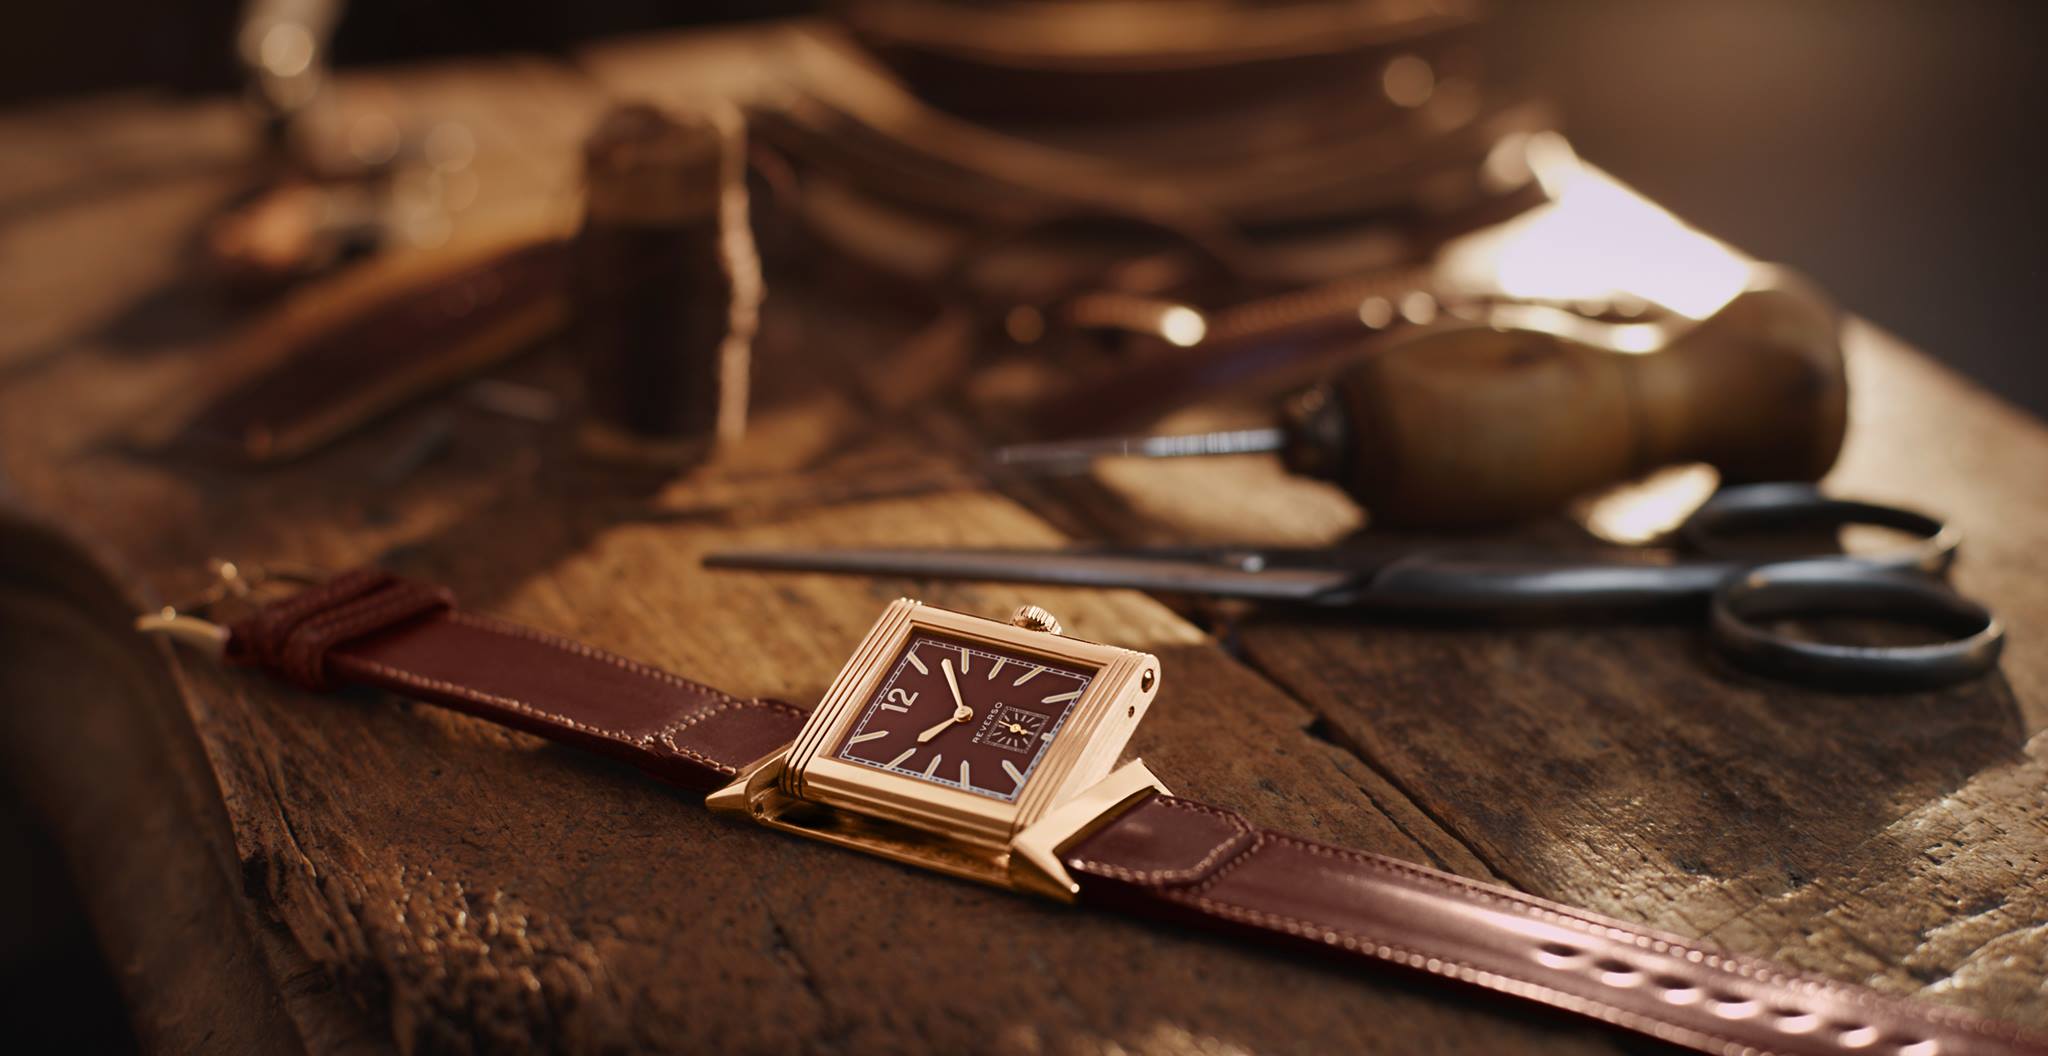 The style of Jaeger-LeCoultre watches